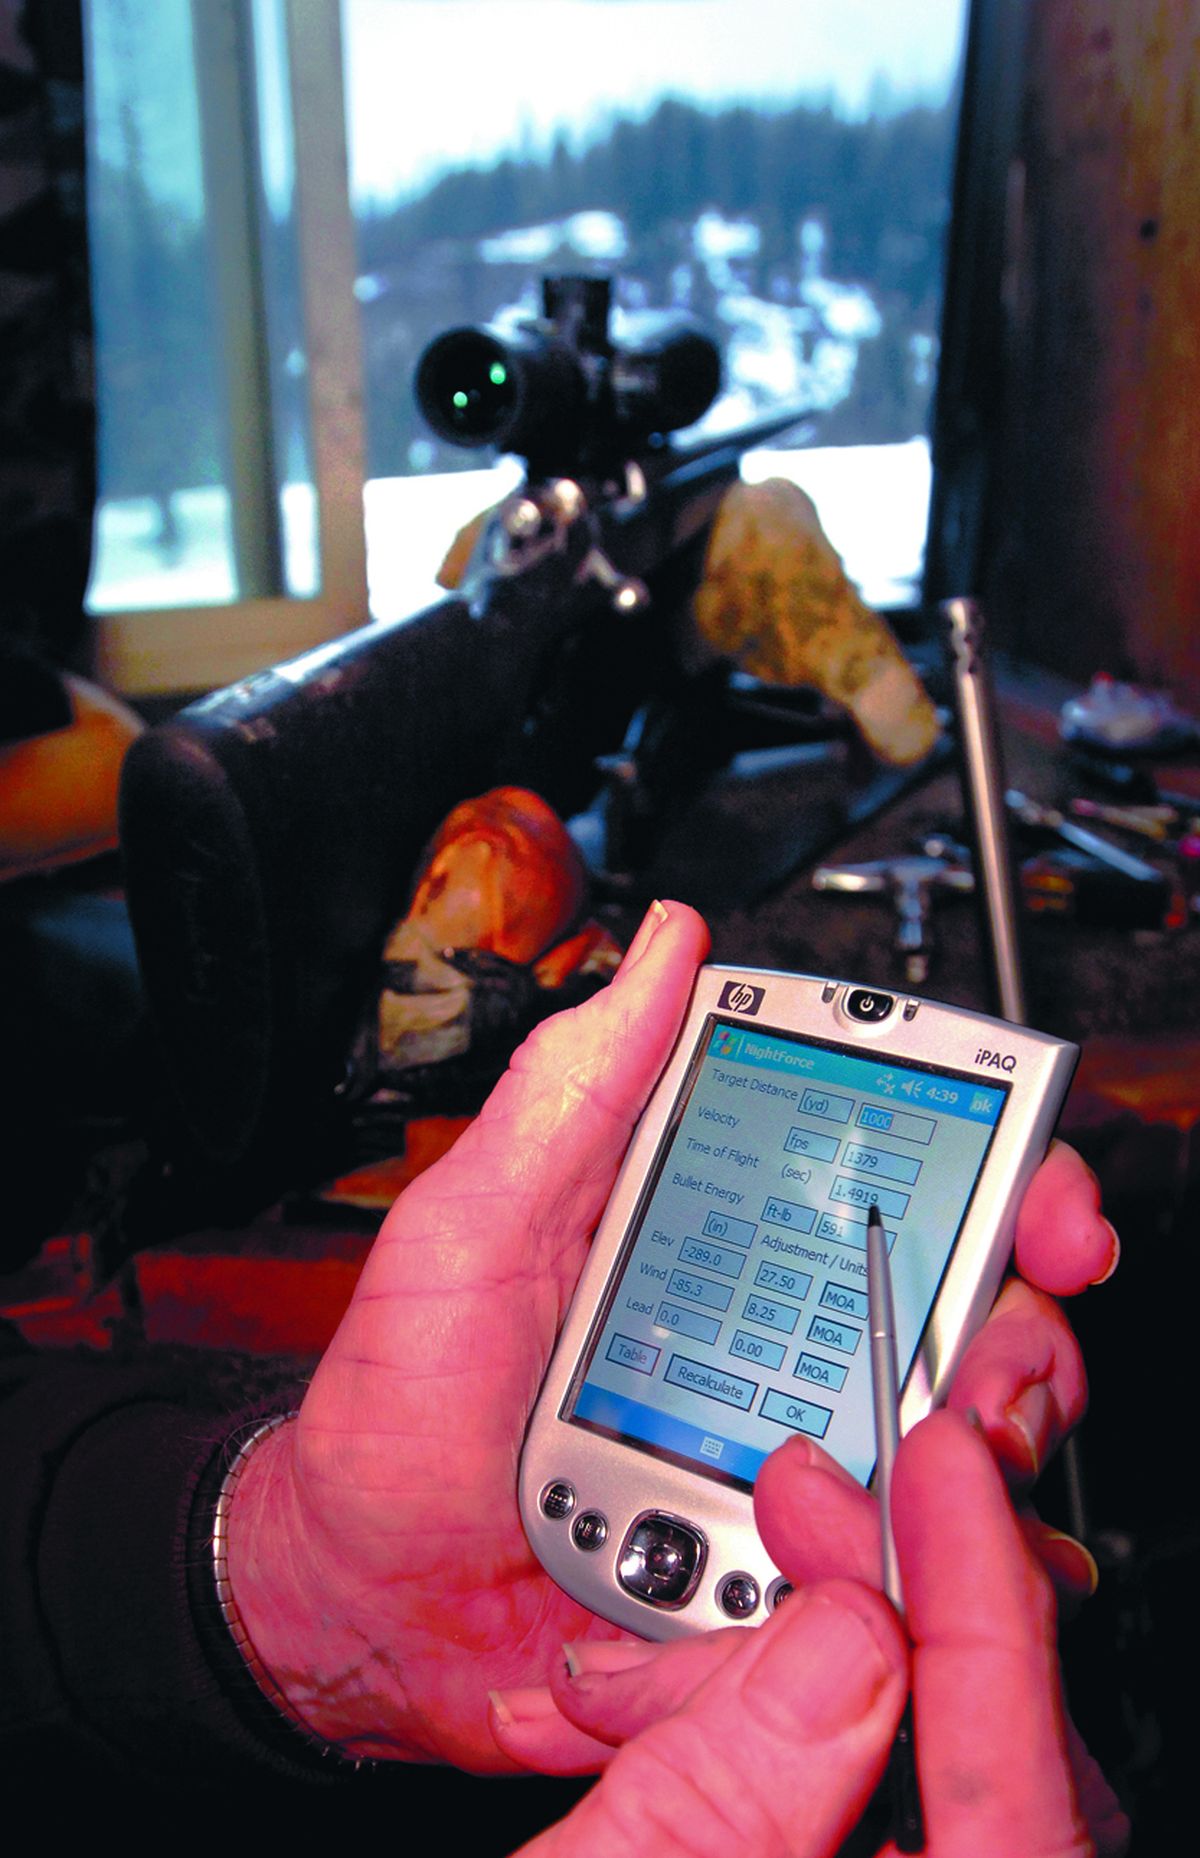 A handheld shooting computer aides calculations for different calibers, loads and ranges for long-range targets.